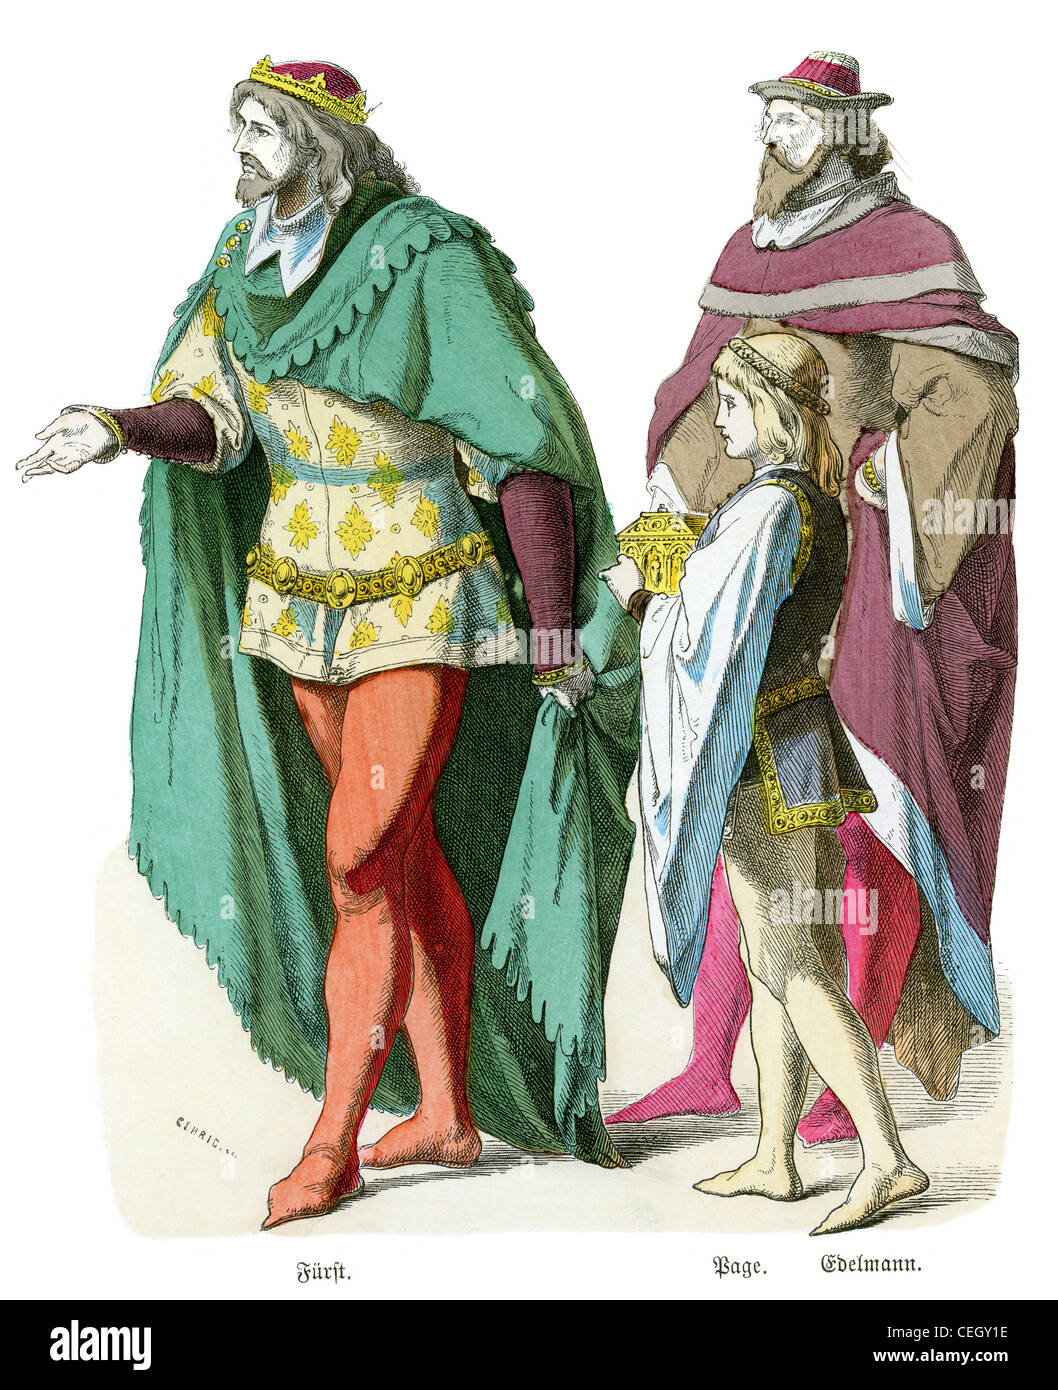 A German prince or Fürst, a page boy, and nobleman from the 14th Century Stock Photo